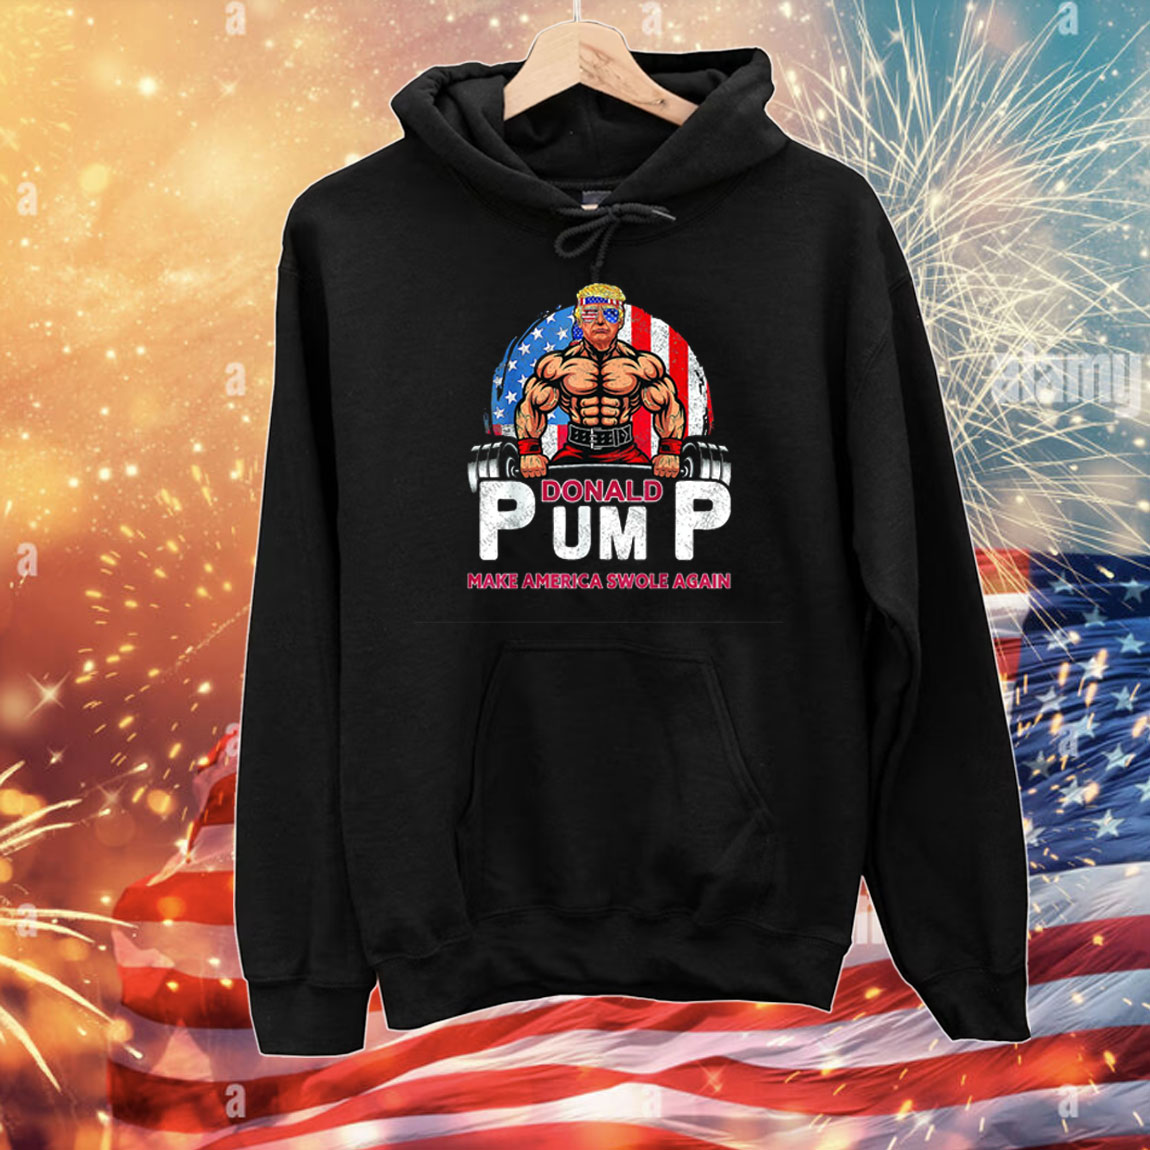 Donald Pump Swole America t-rump Weight Lifting Gym Fitness T-Shirts